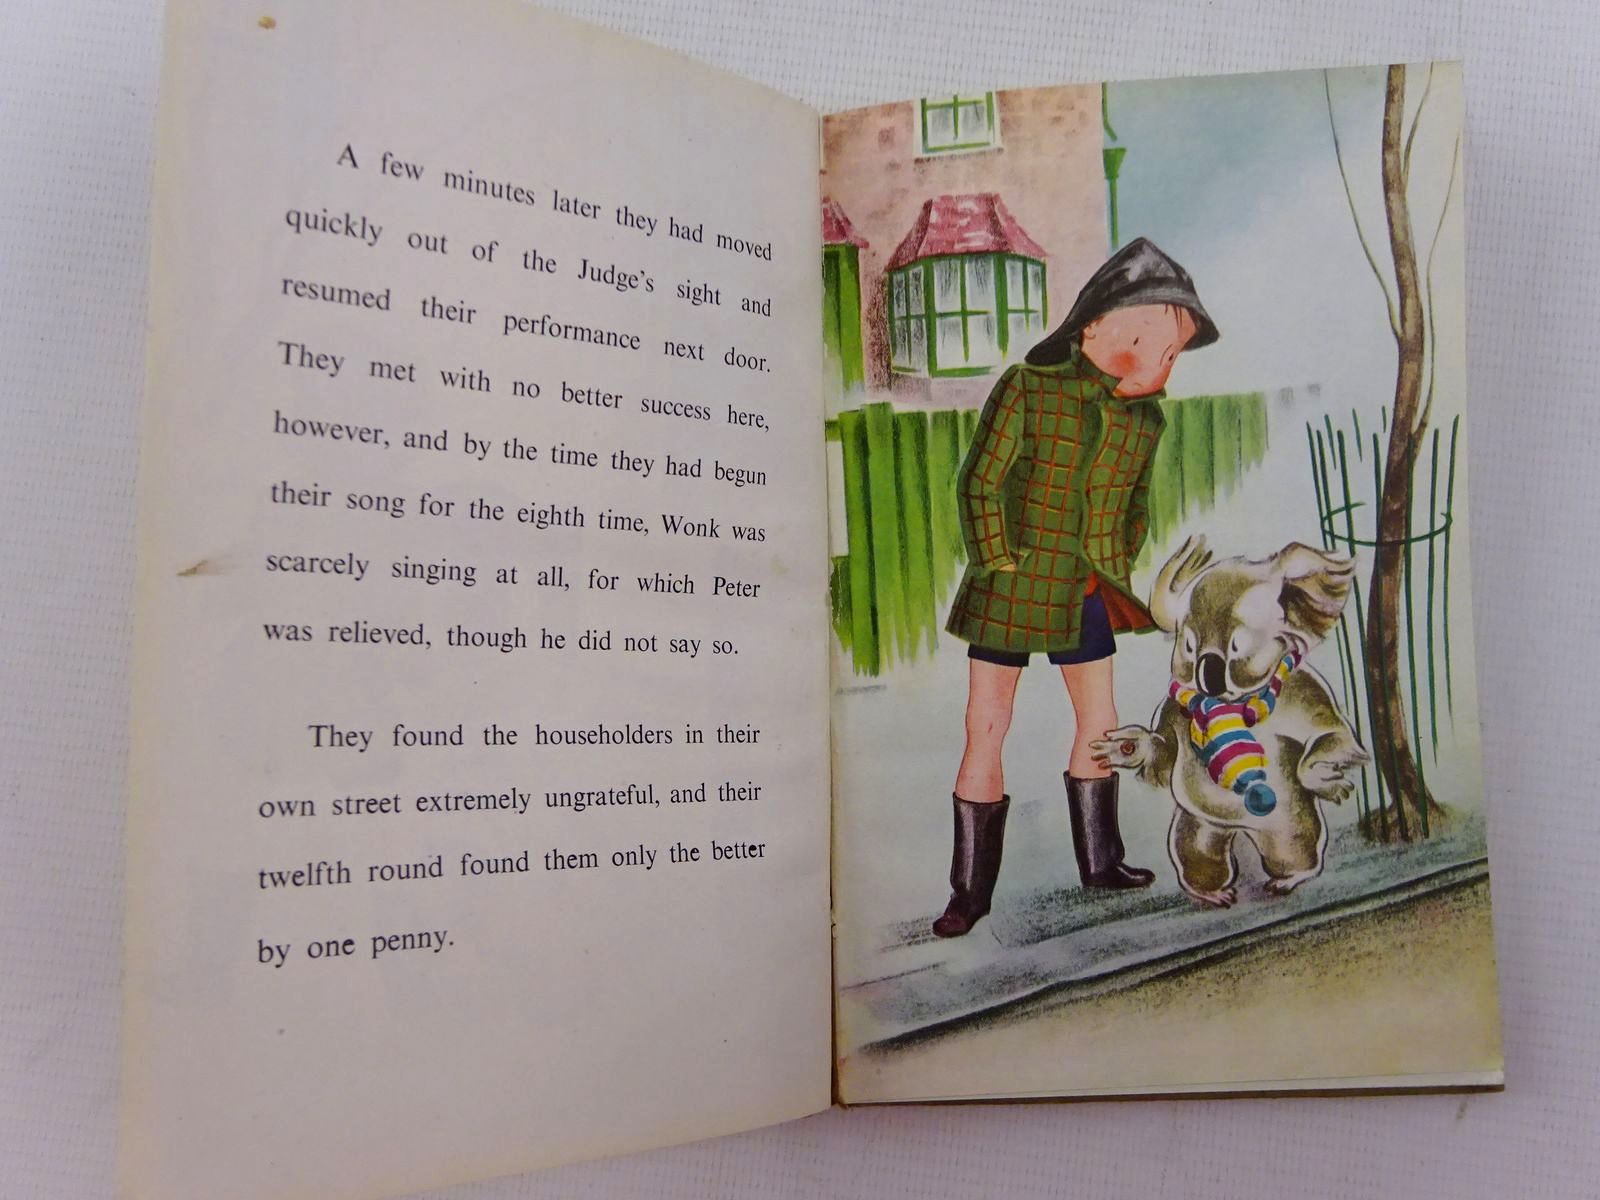 Photo of THE ADVENTURES OF WONK - FIREWORKS written by Levy, Muriel illustrated by Kiddell-Monroe, Joan published by Wills & Hepworth Ltd. (STOCK CODE: 2129021)  for sale by Stella & Rose's Books